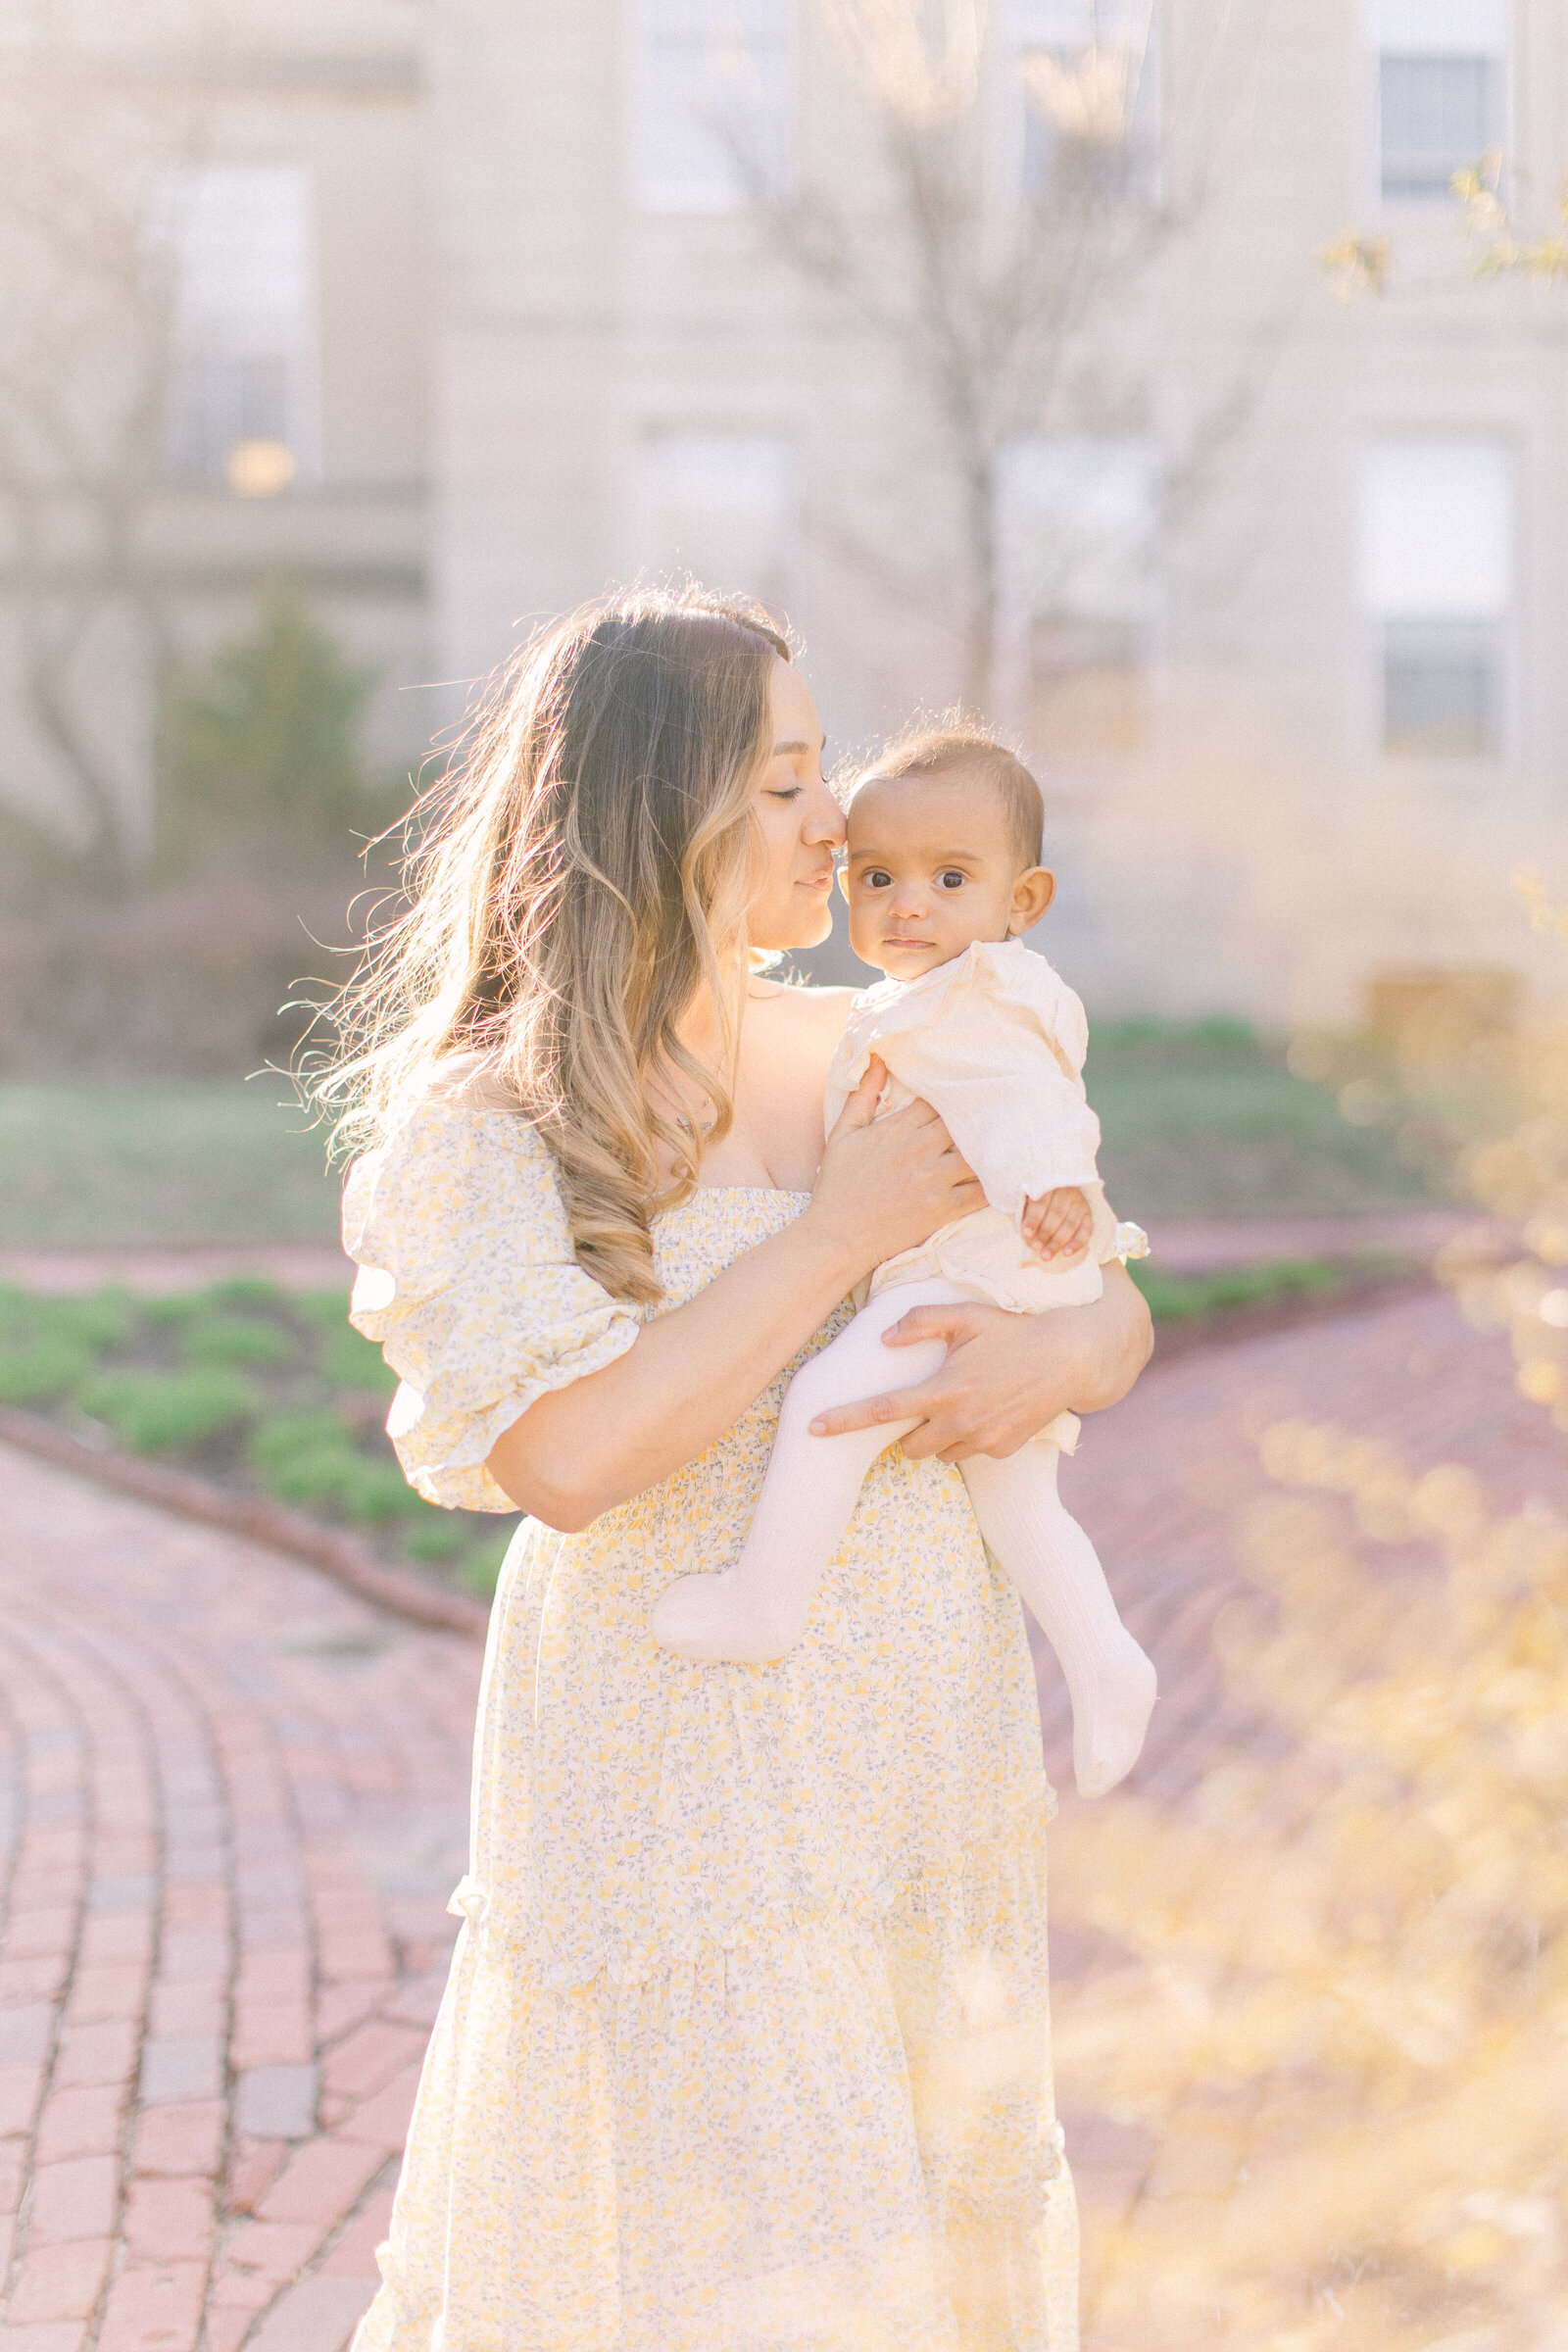 A young mother is holding her baby girl outside standing on a brick pathway in front of some light yellow flowers during photo session with Boston newborn photographer Corinne Isabelle